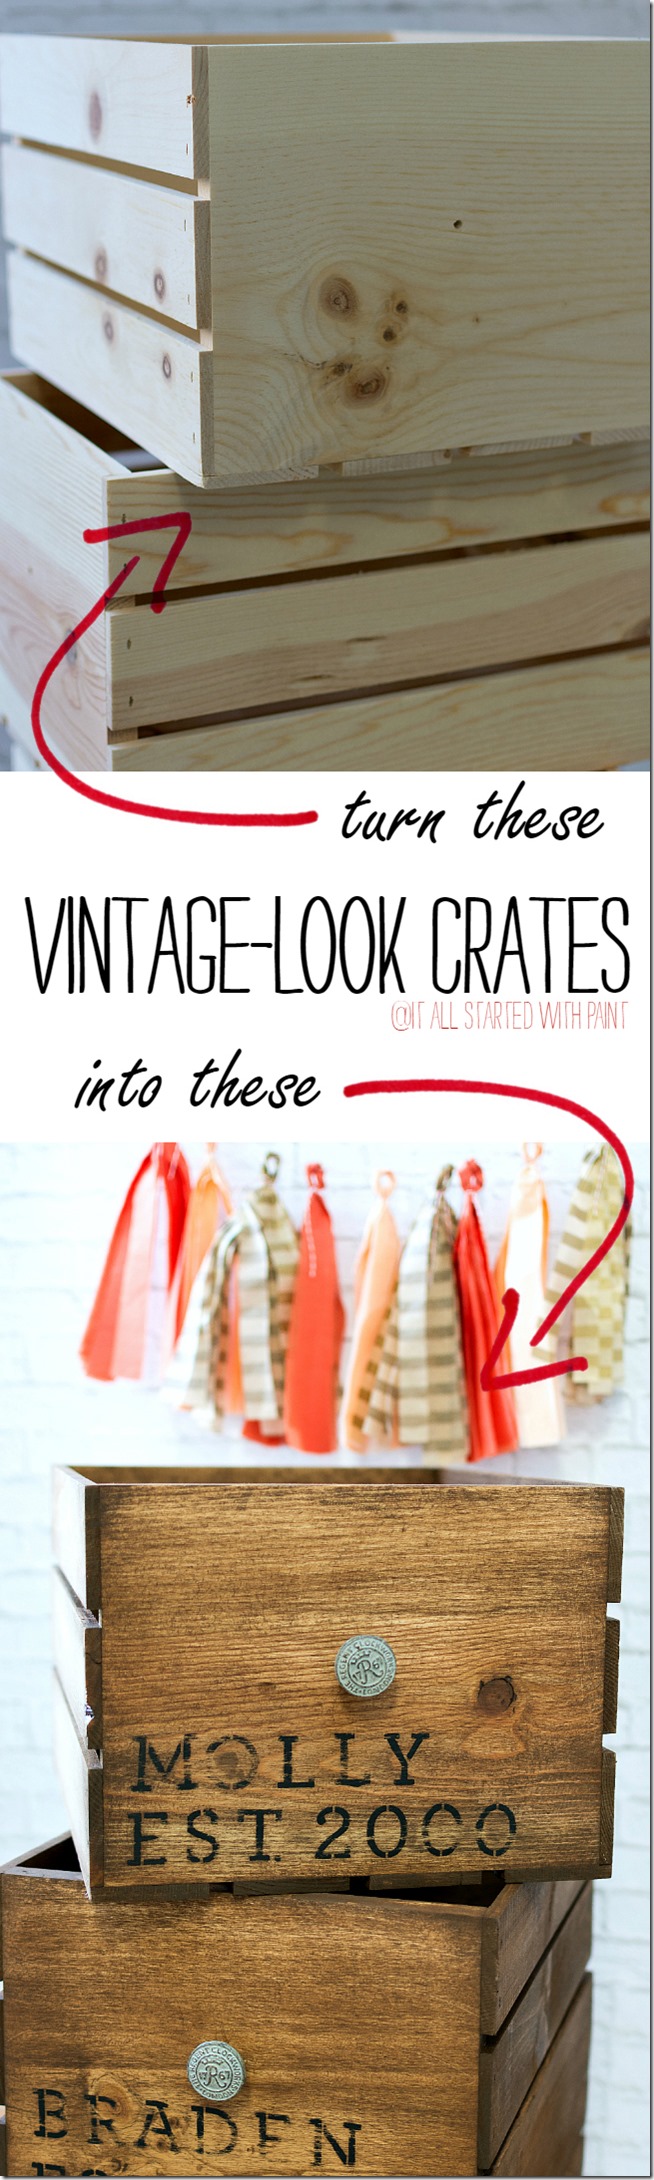 vintage-look-crate-diy-how-to-age-new-crates